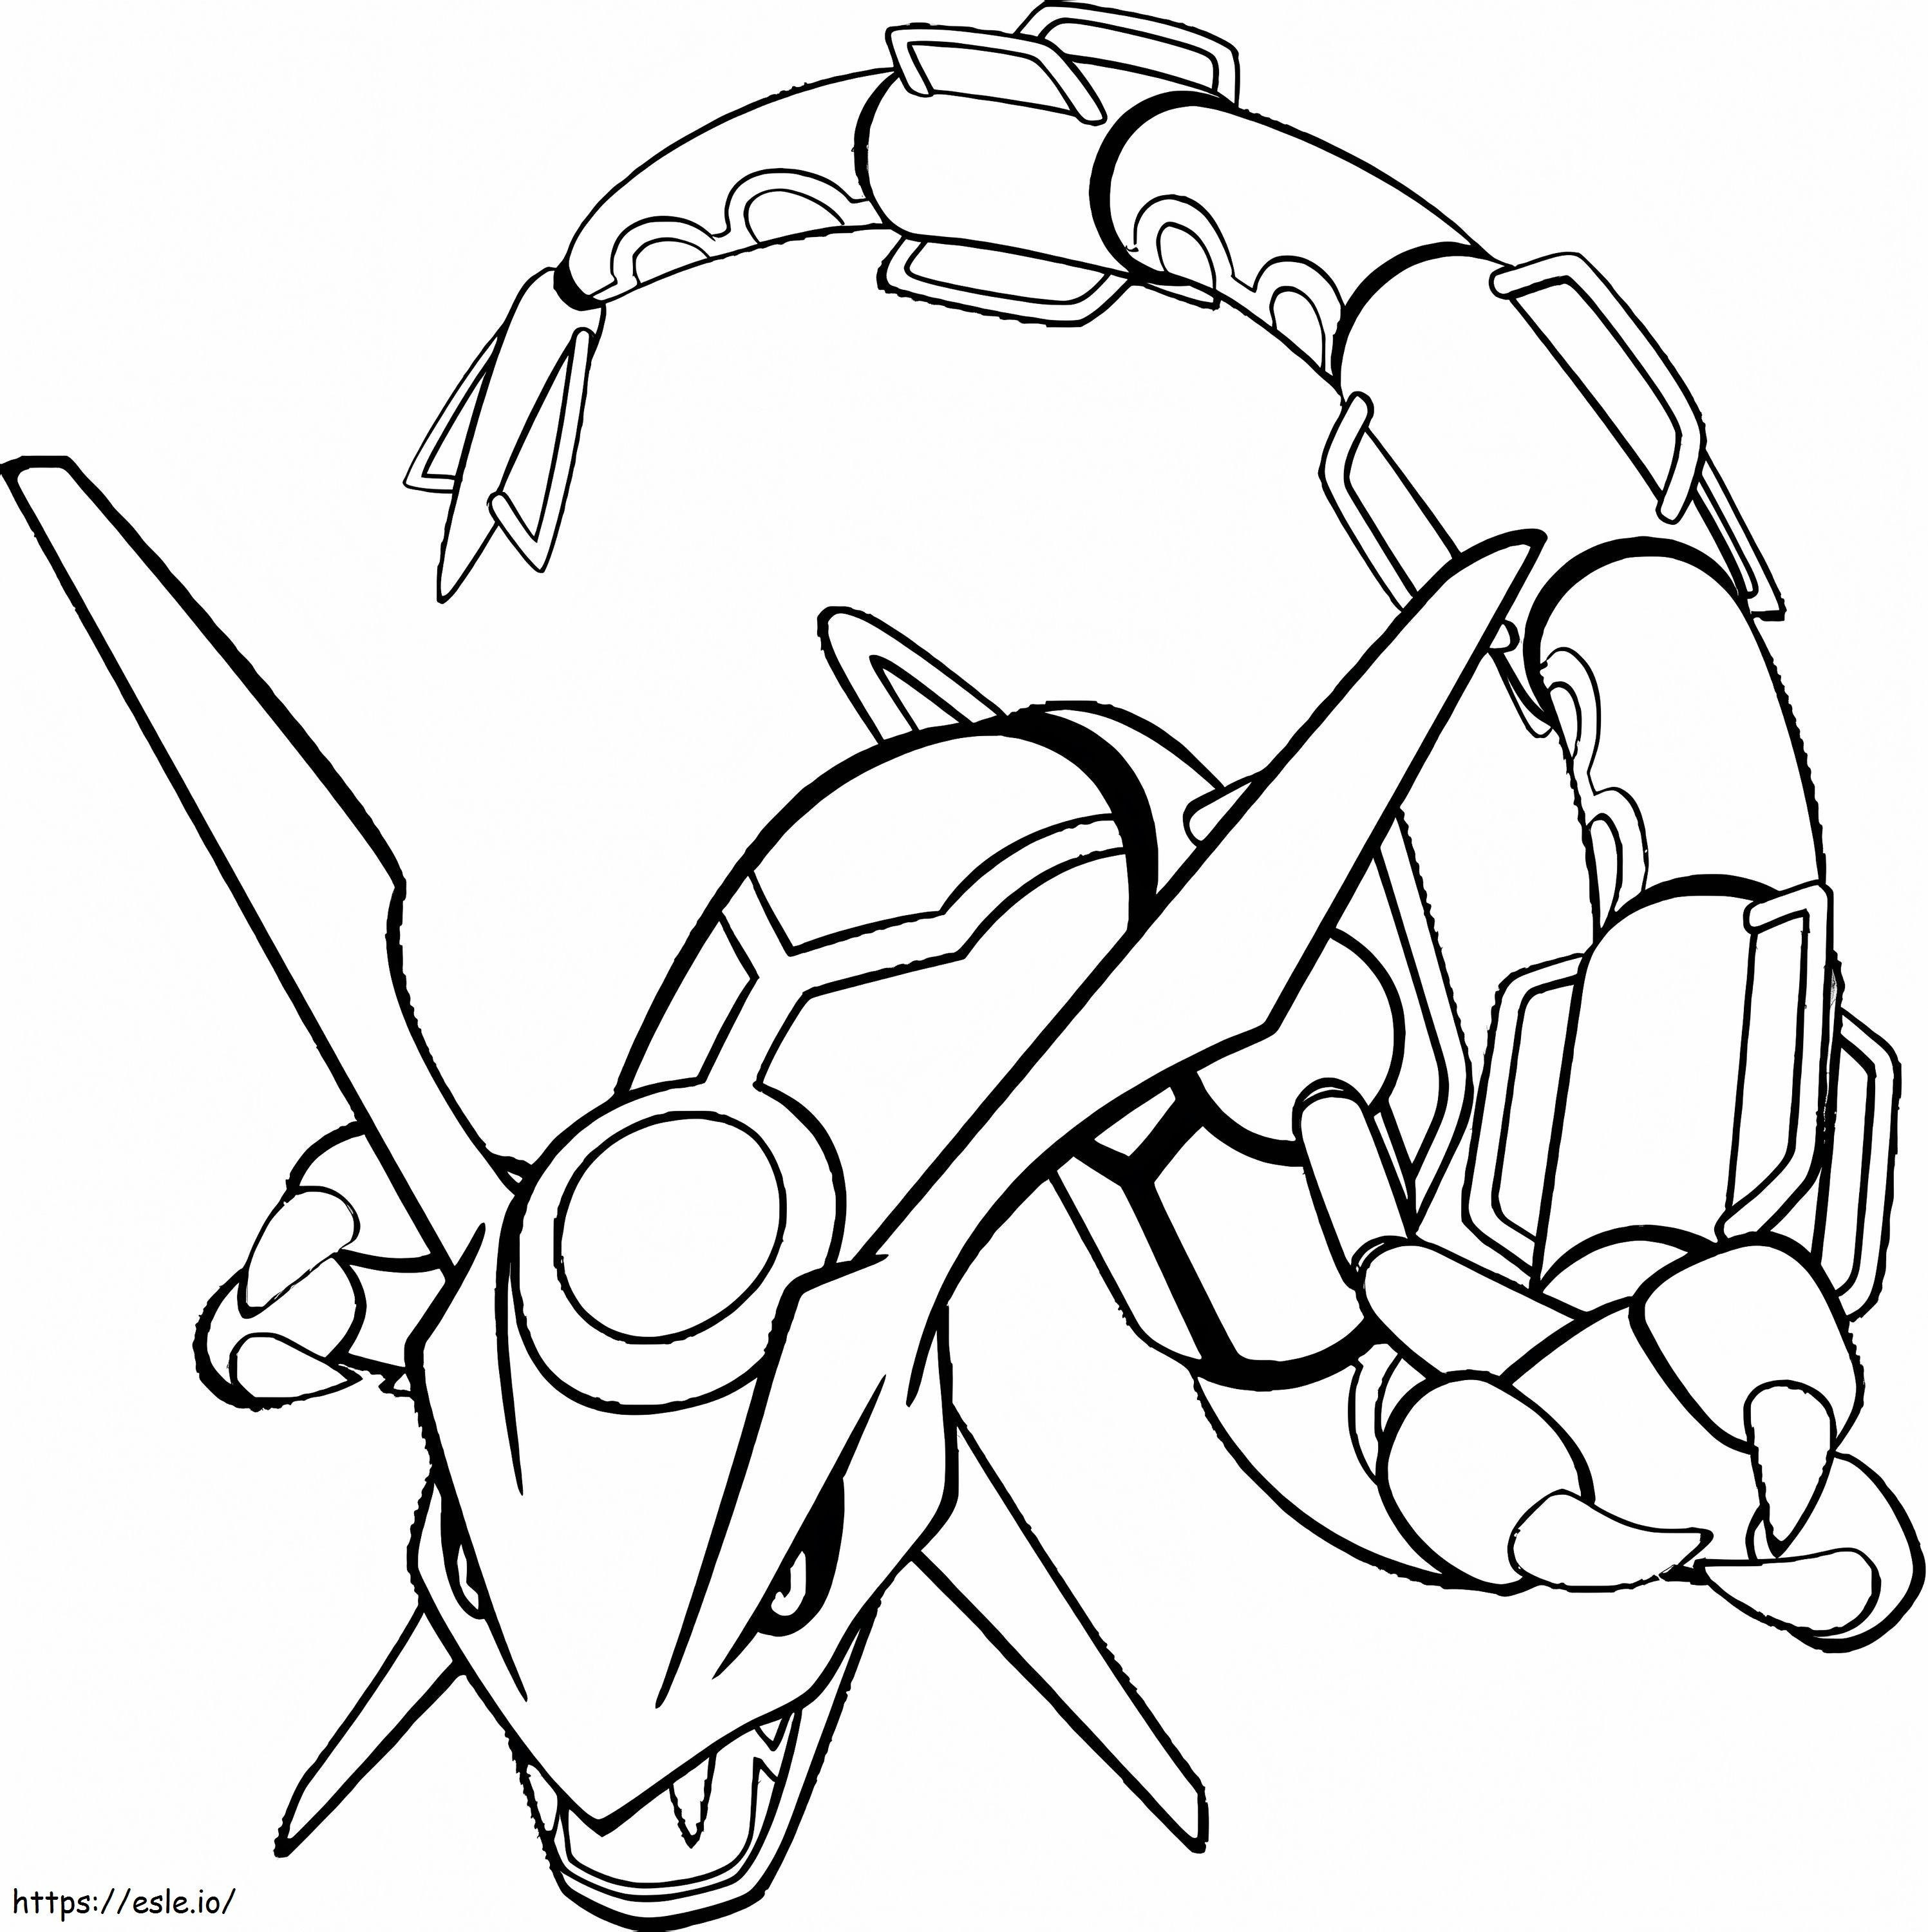 Rayquaza 3 coloring page